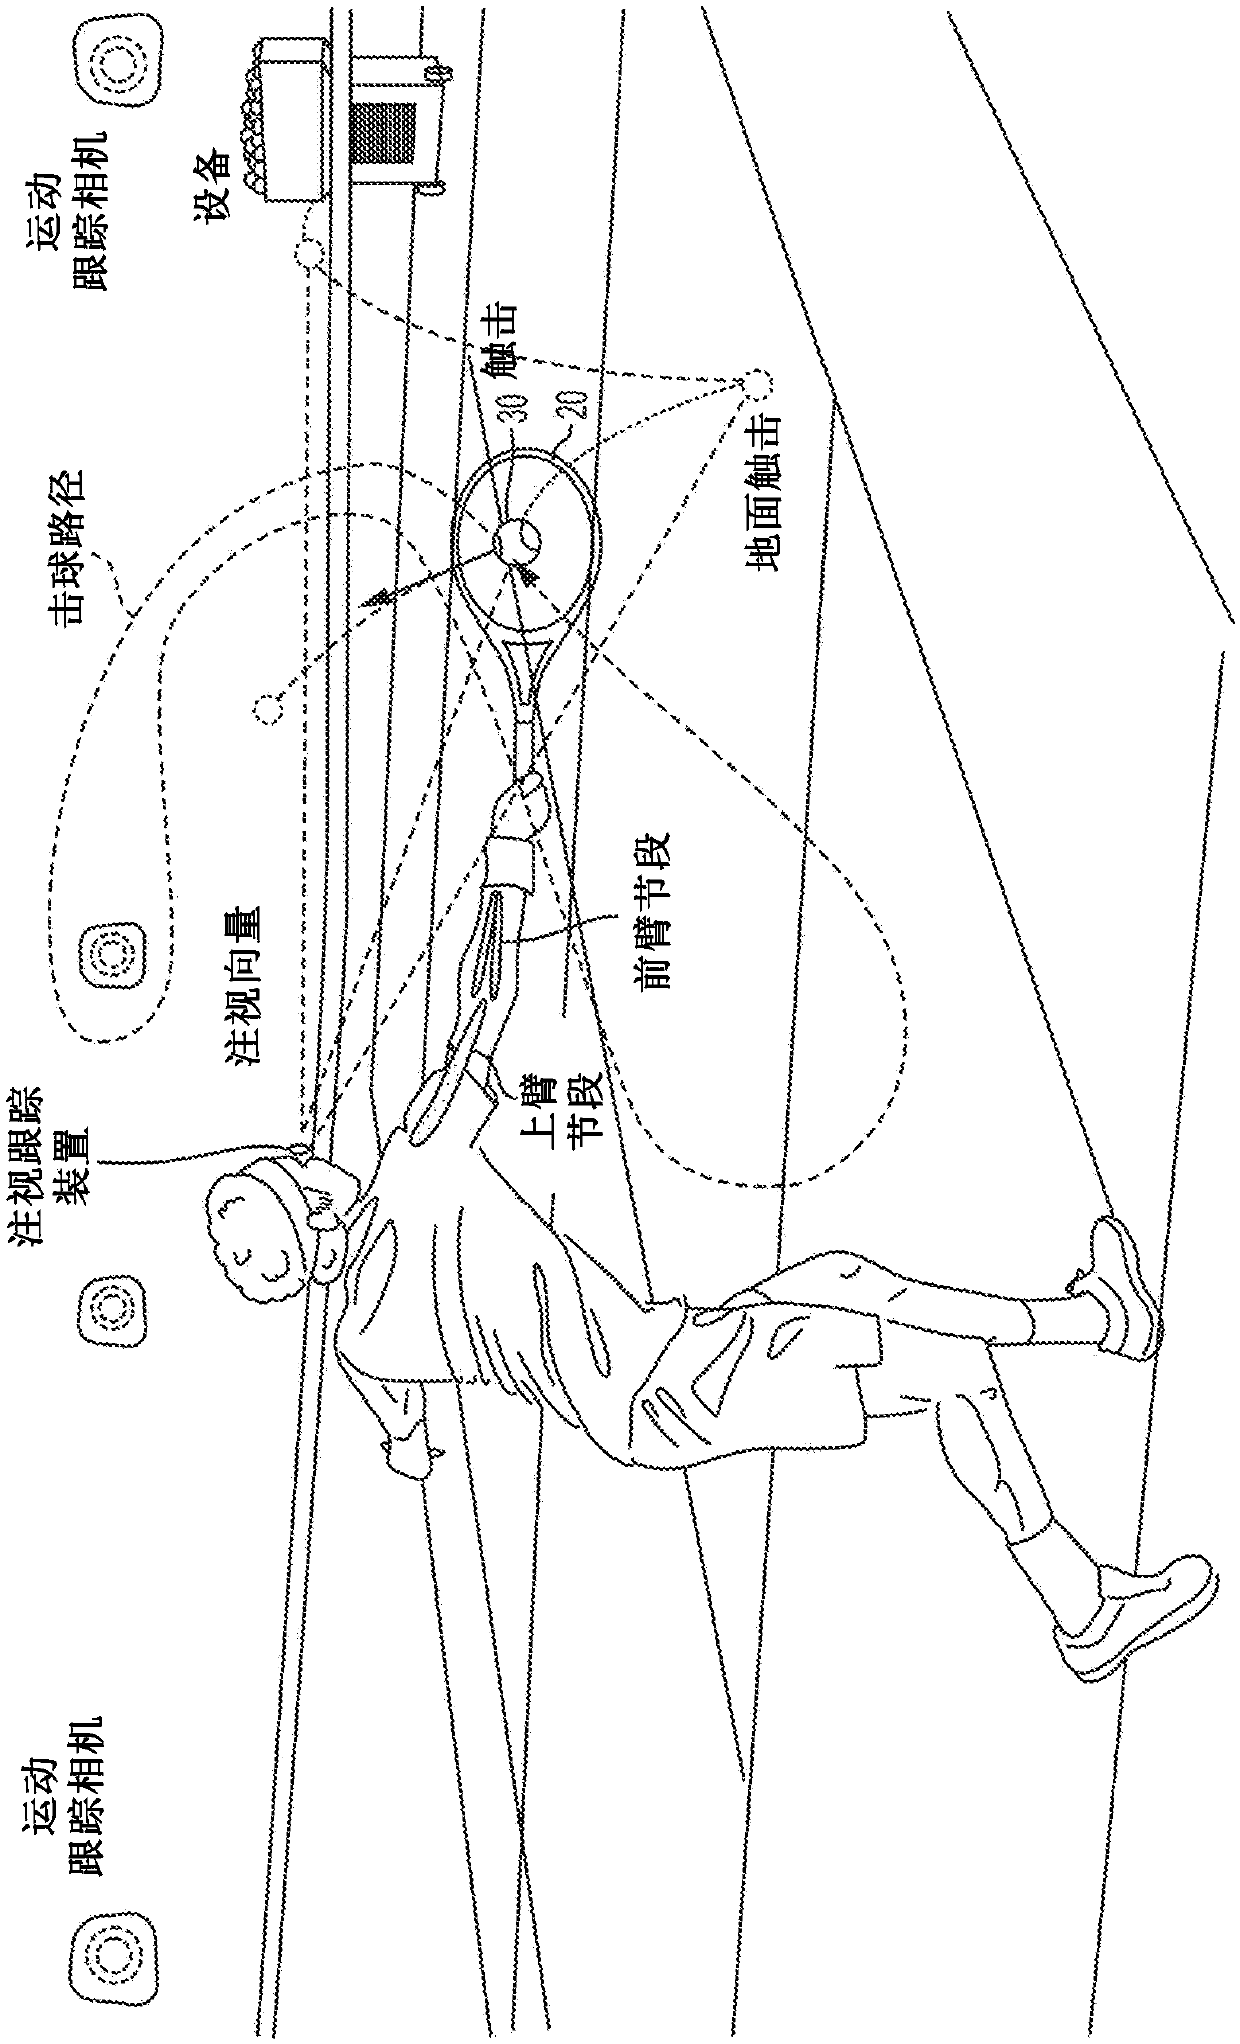 Systems and methods for movement skill analysis and skill augmentation and cueing